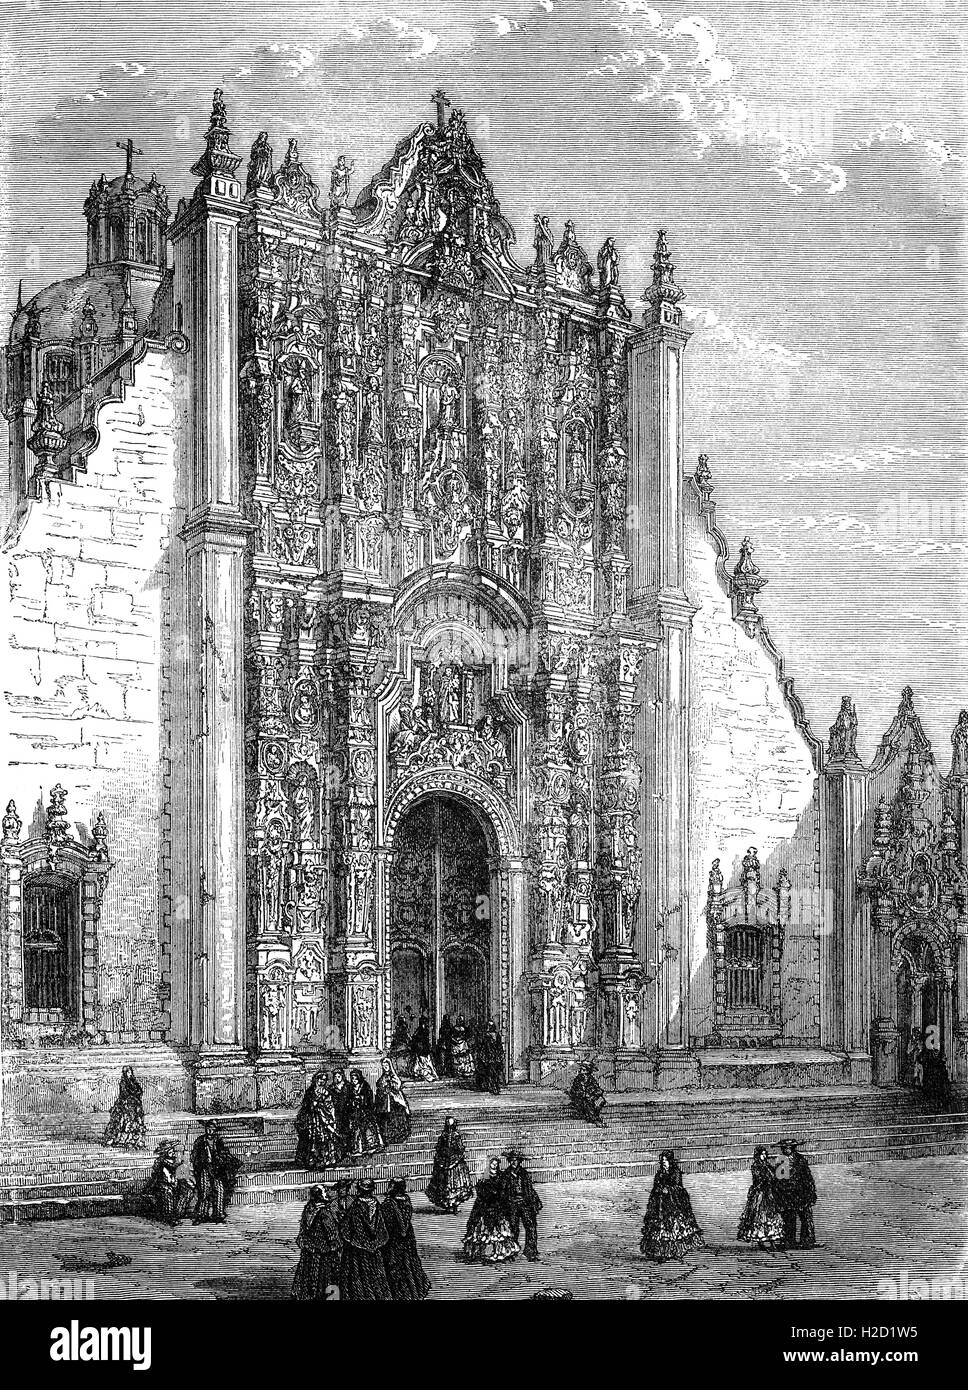 19th Century view of the Metropolitan Cathedral of the Assumption of the Most Blessed Virgin Mary into Heaven  is the largest cathedral in the Americas and seat of the Roman Catholic Archdiocese of Mexico. Stock Photo